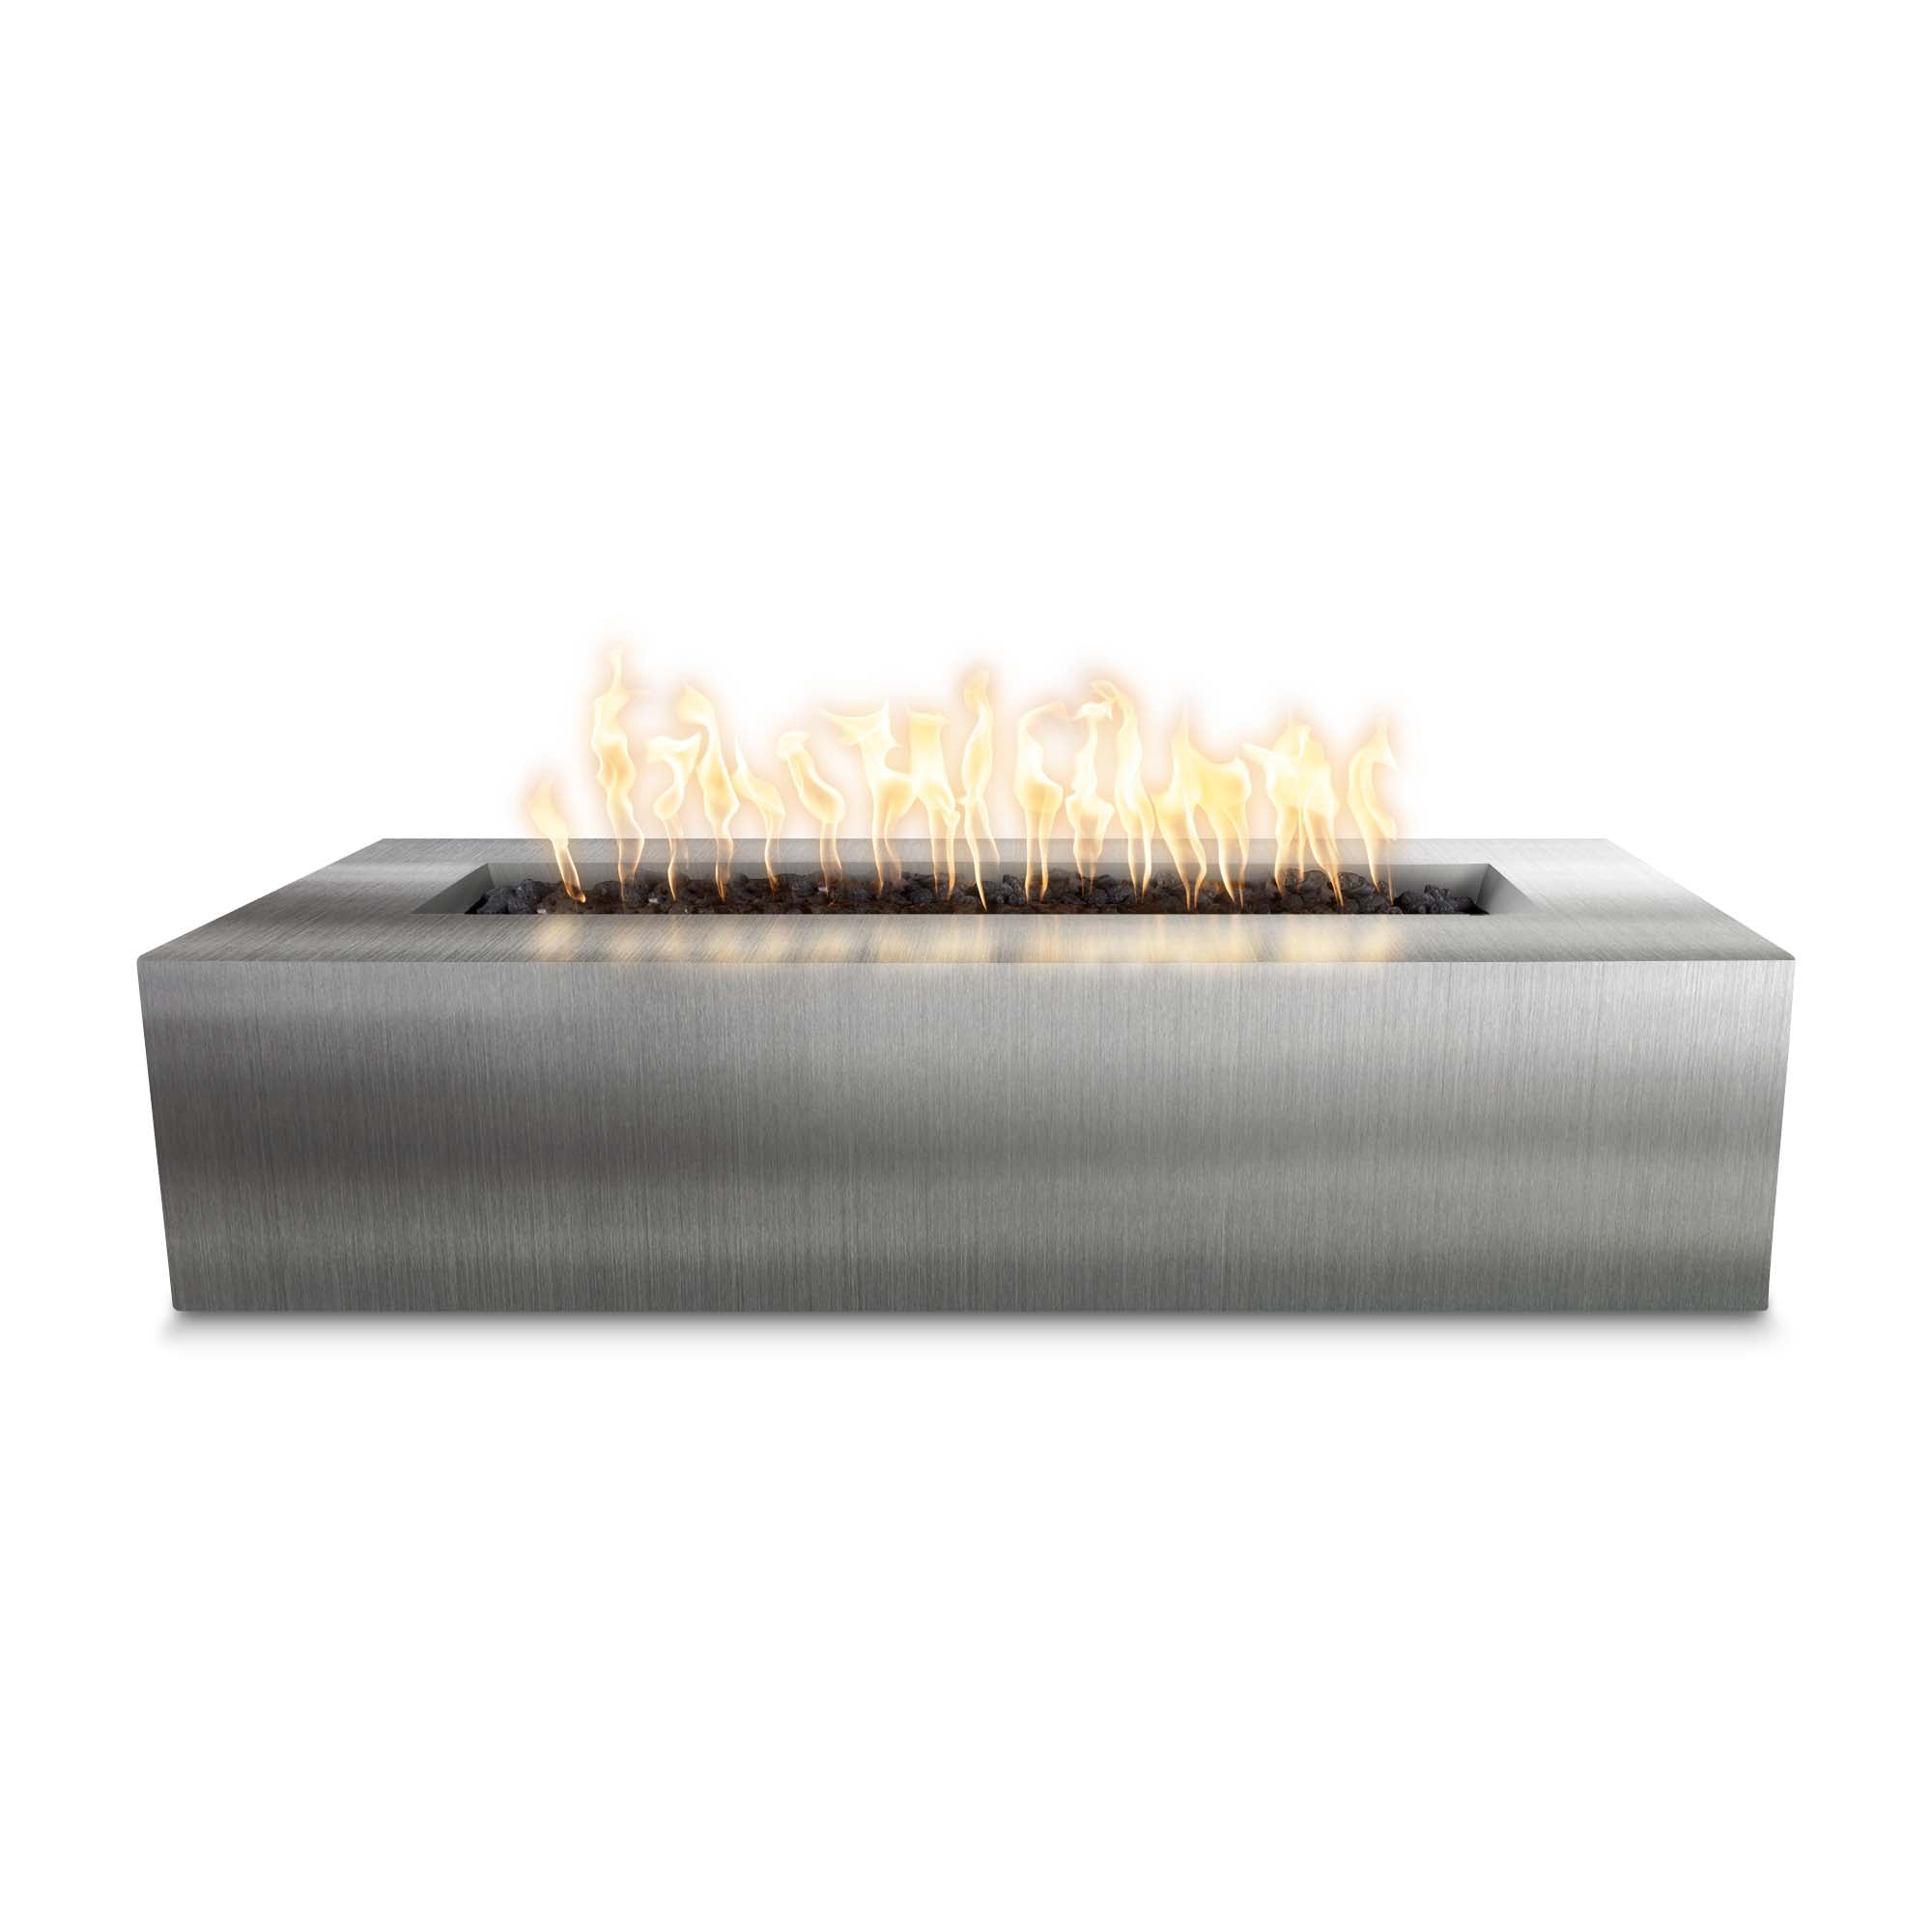 The Outdoor Plus Regal Fire Pit Stainless Steel OPT-RGLSSXX - Serenity Provision